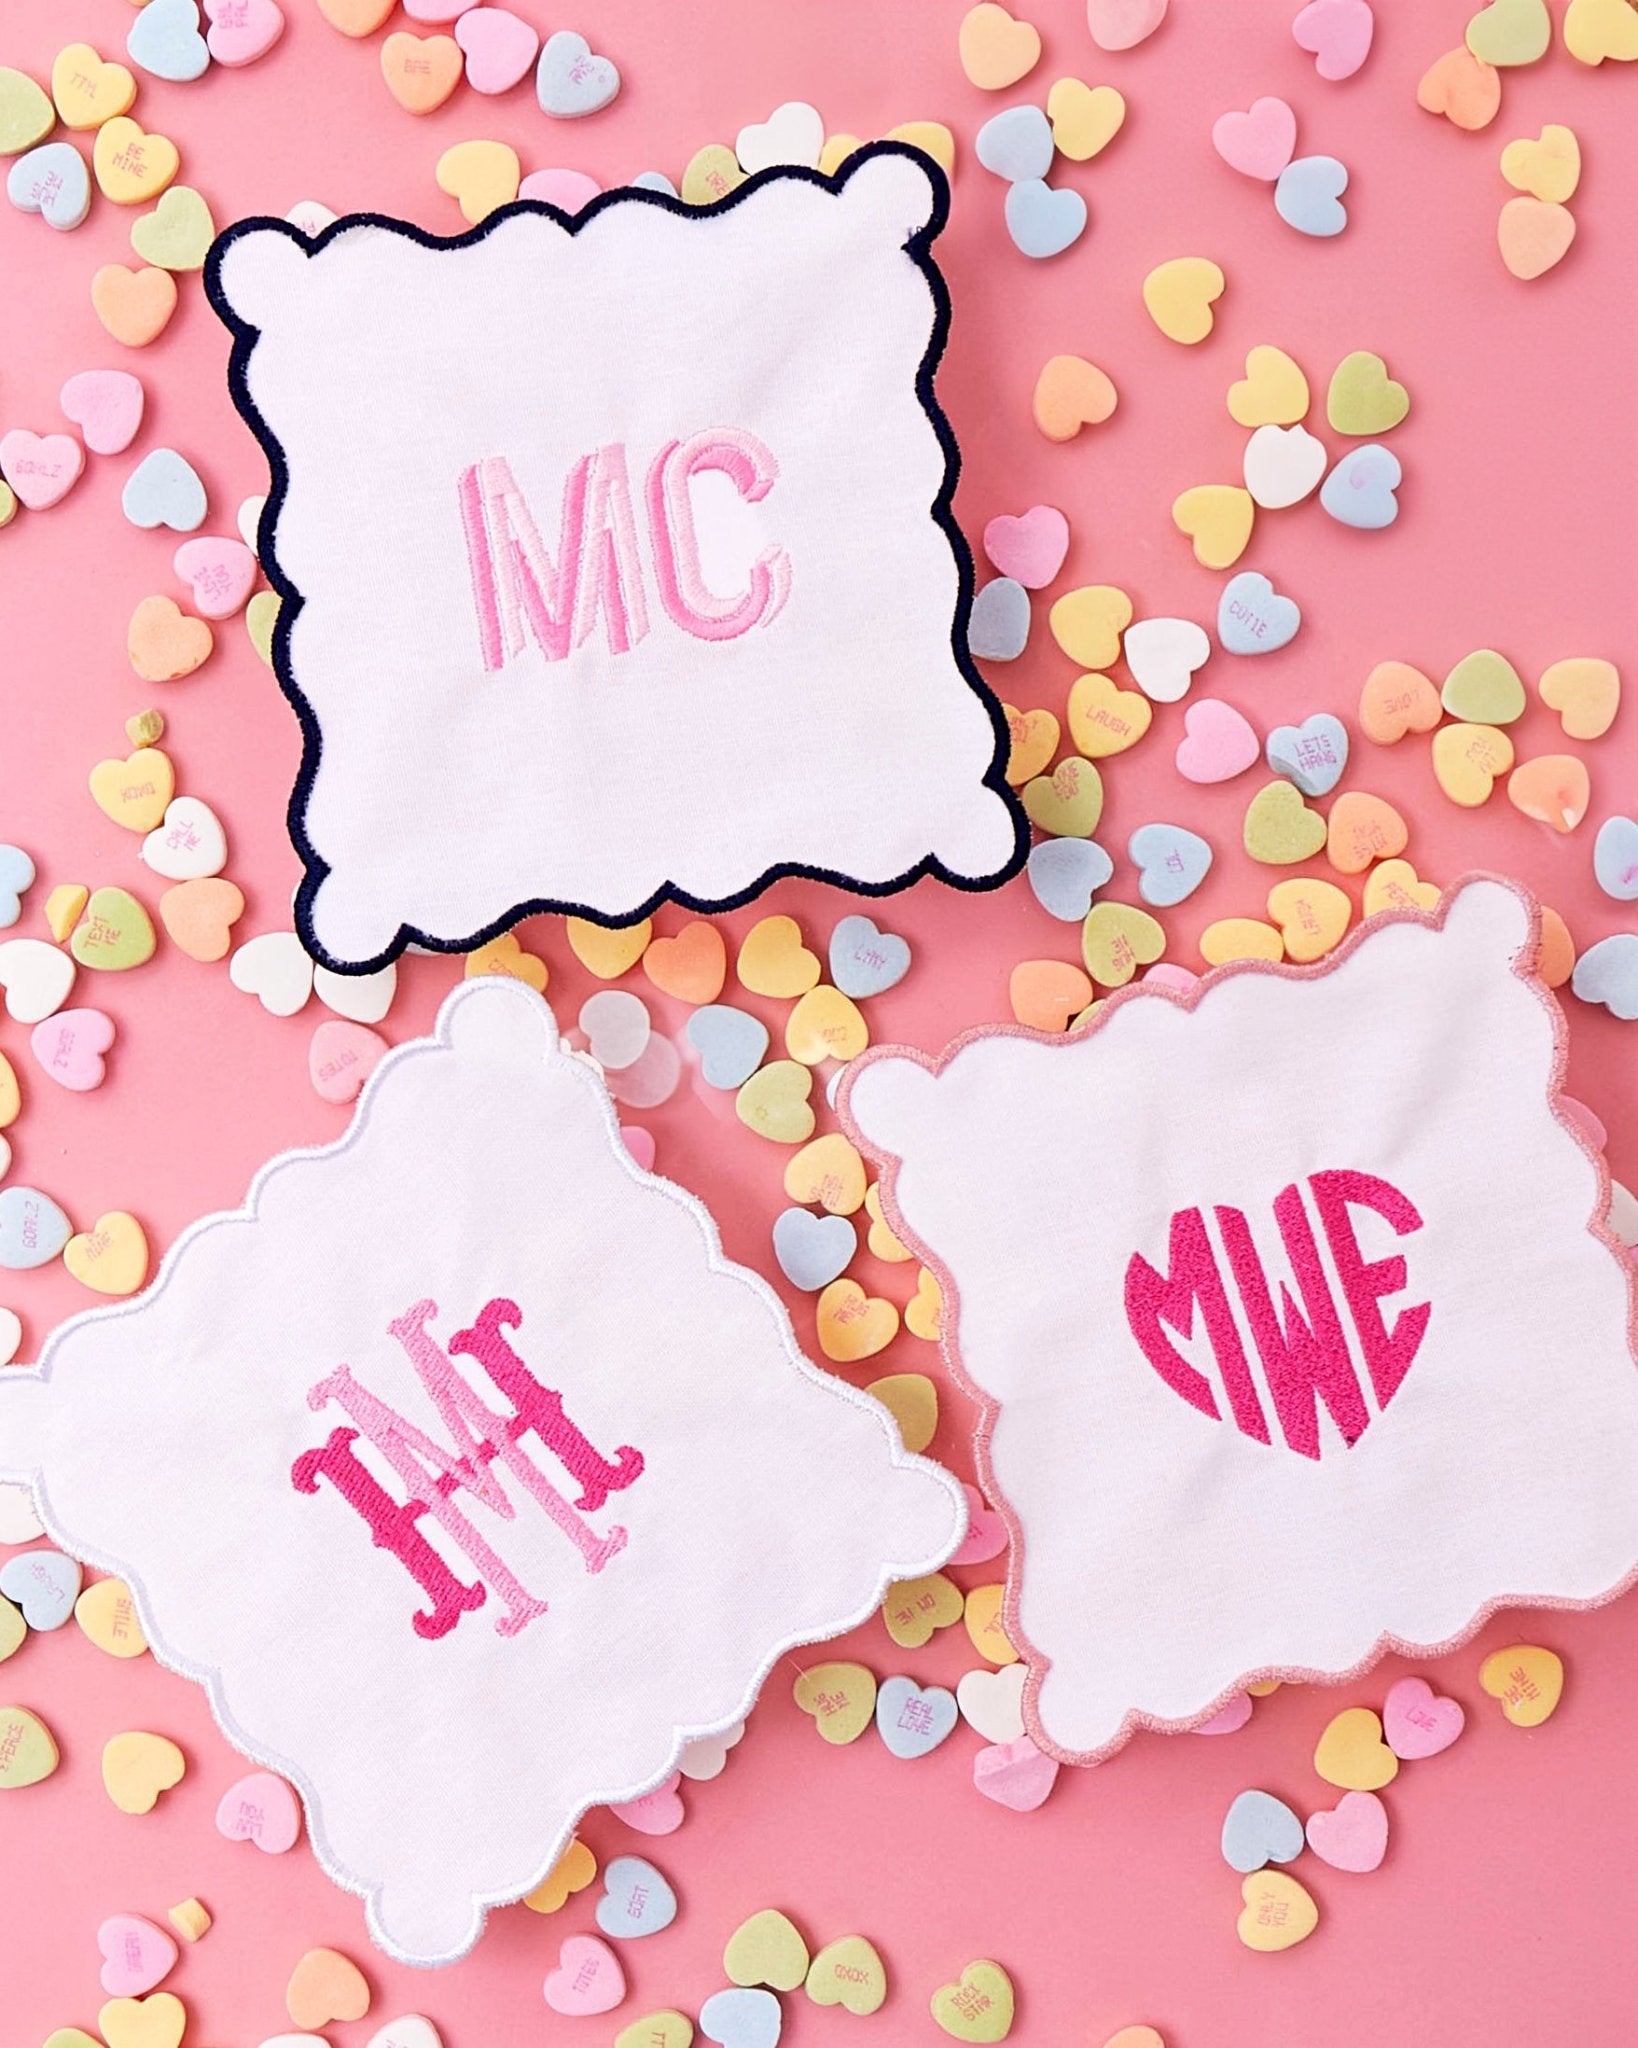 A pink and a white scalloped cocktail napkin are customized with monograms 